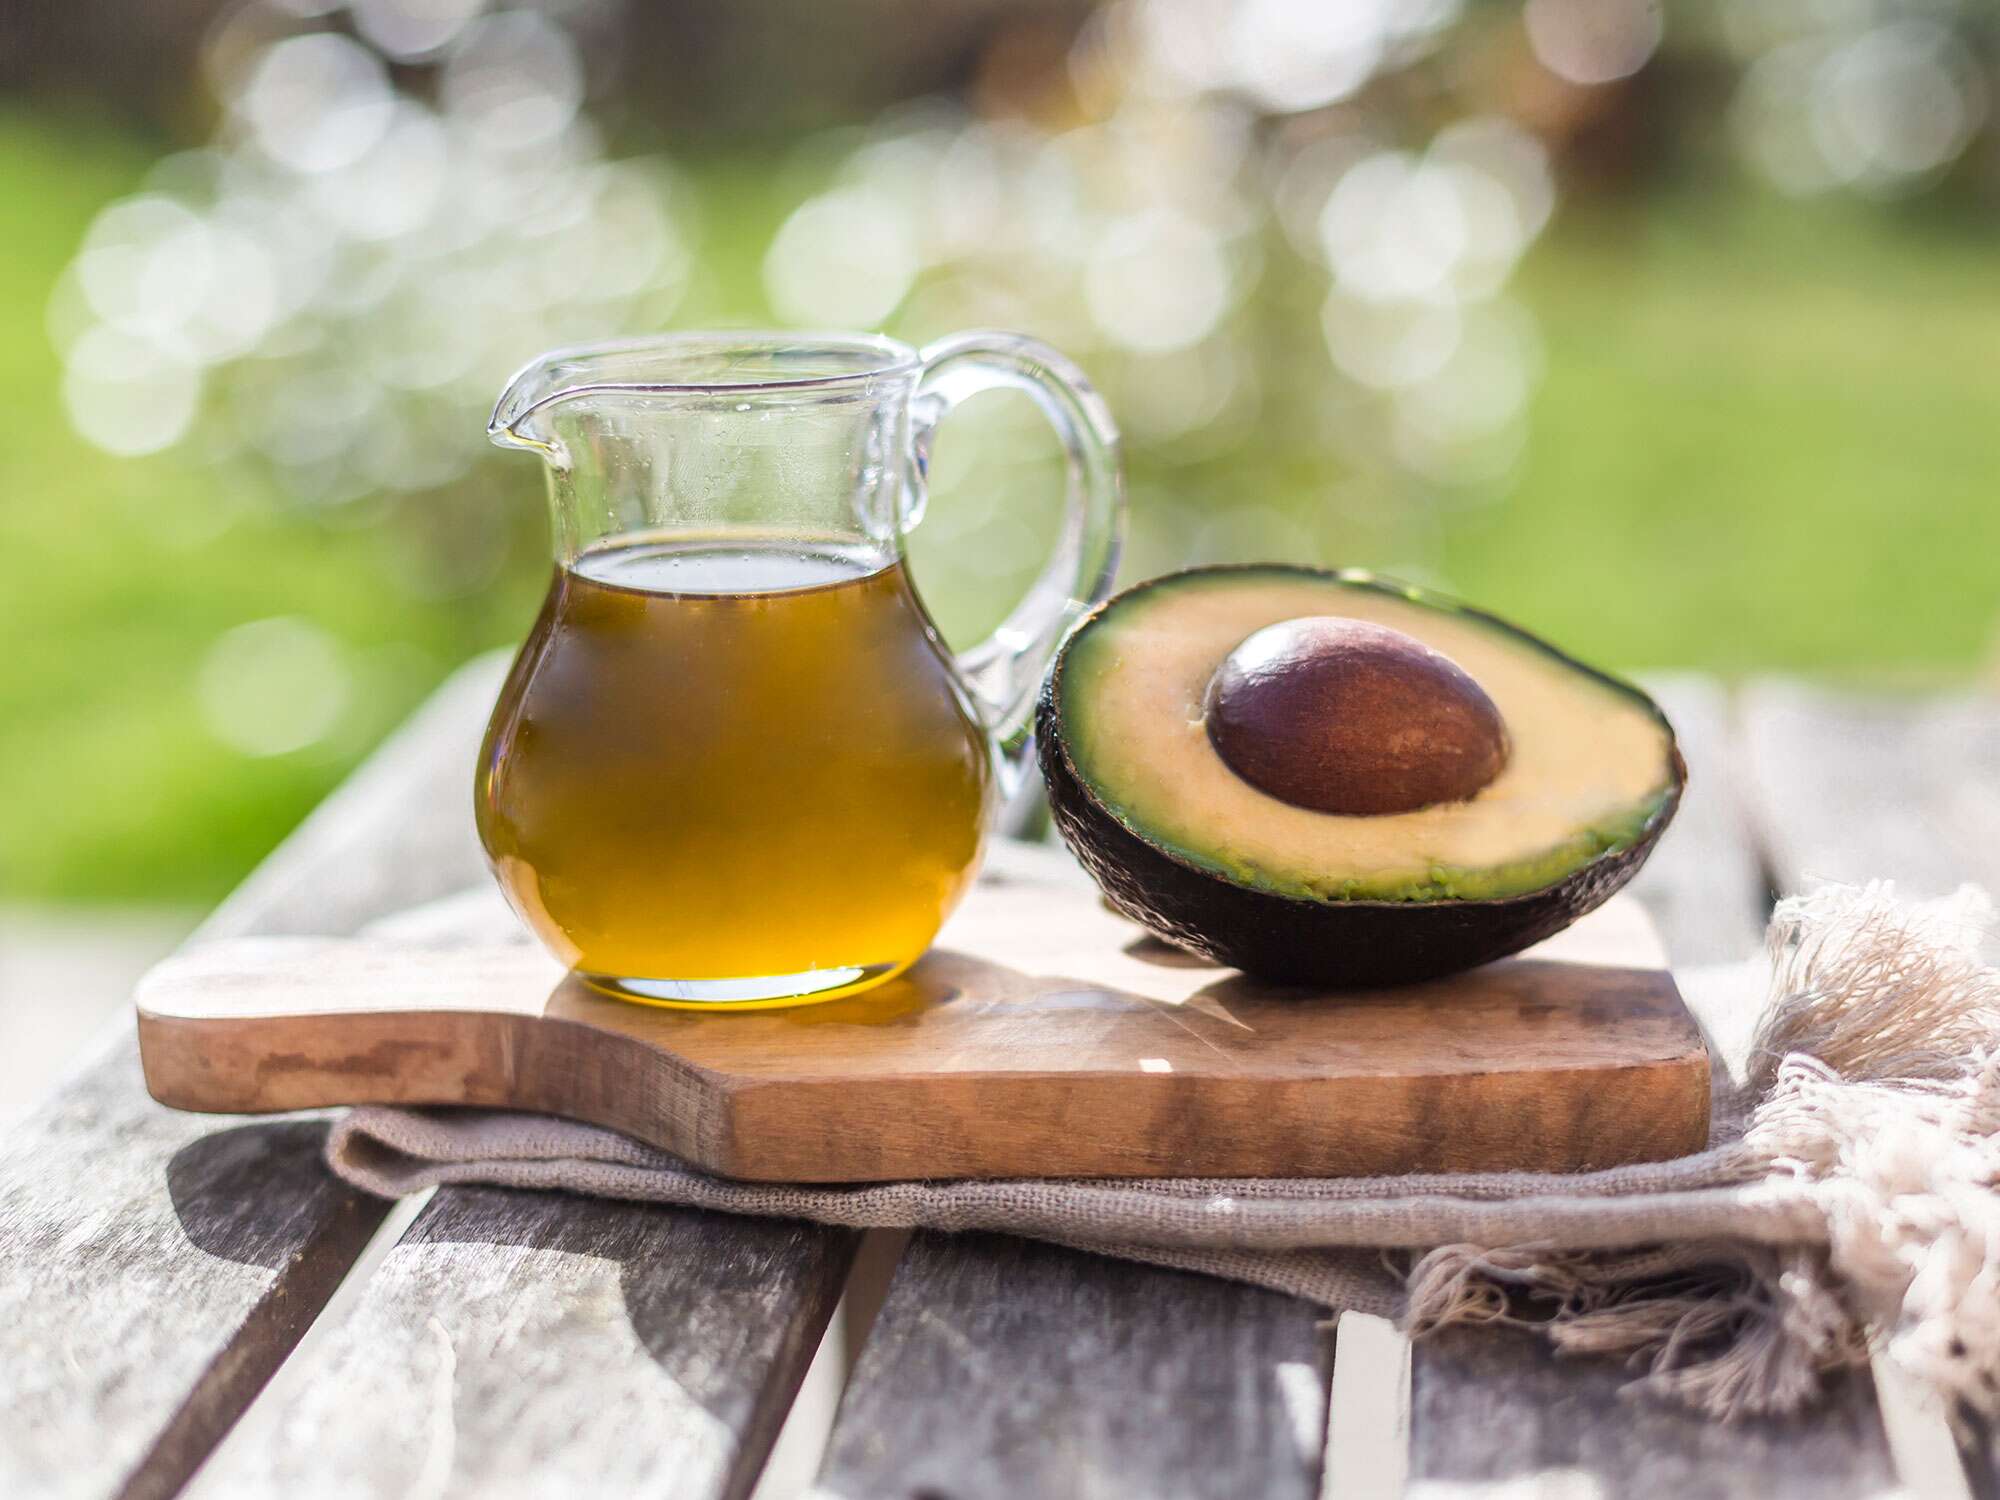 Avocado as Healthy Alternative for Butter and Fat - California